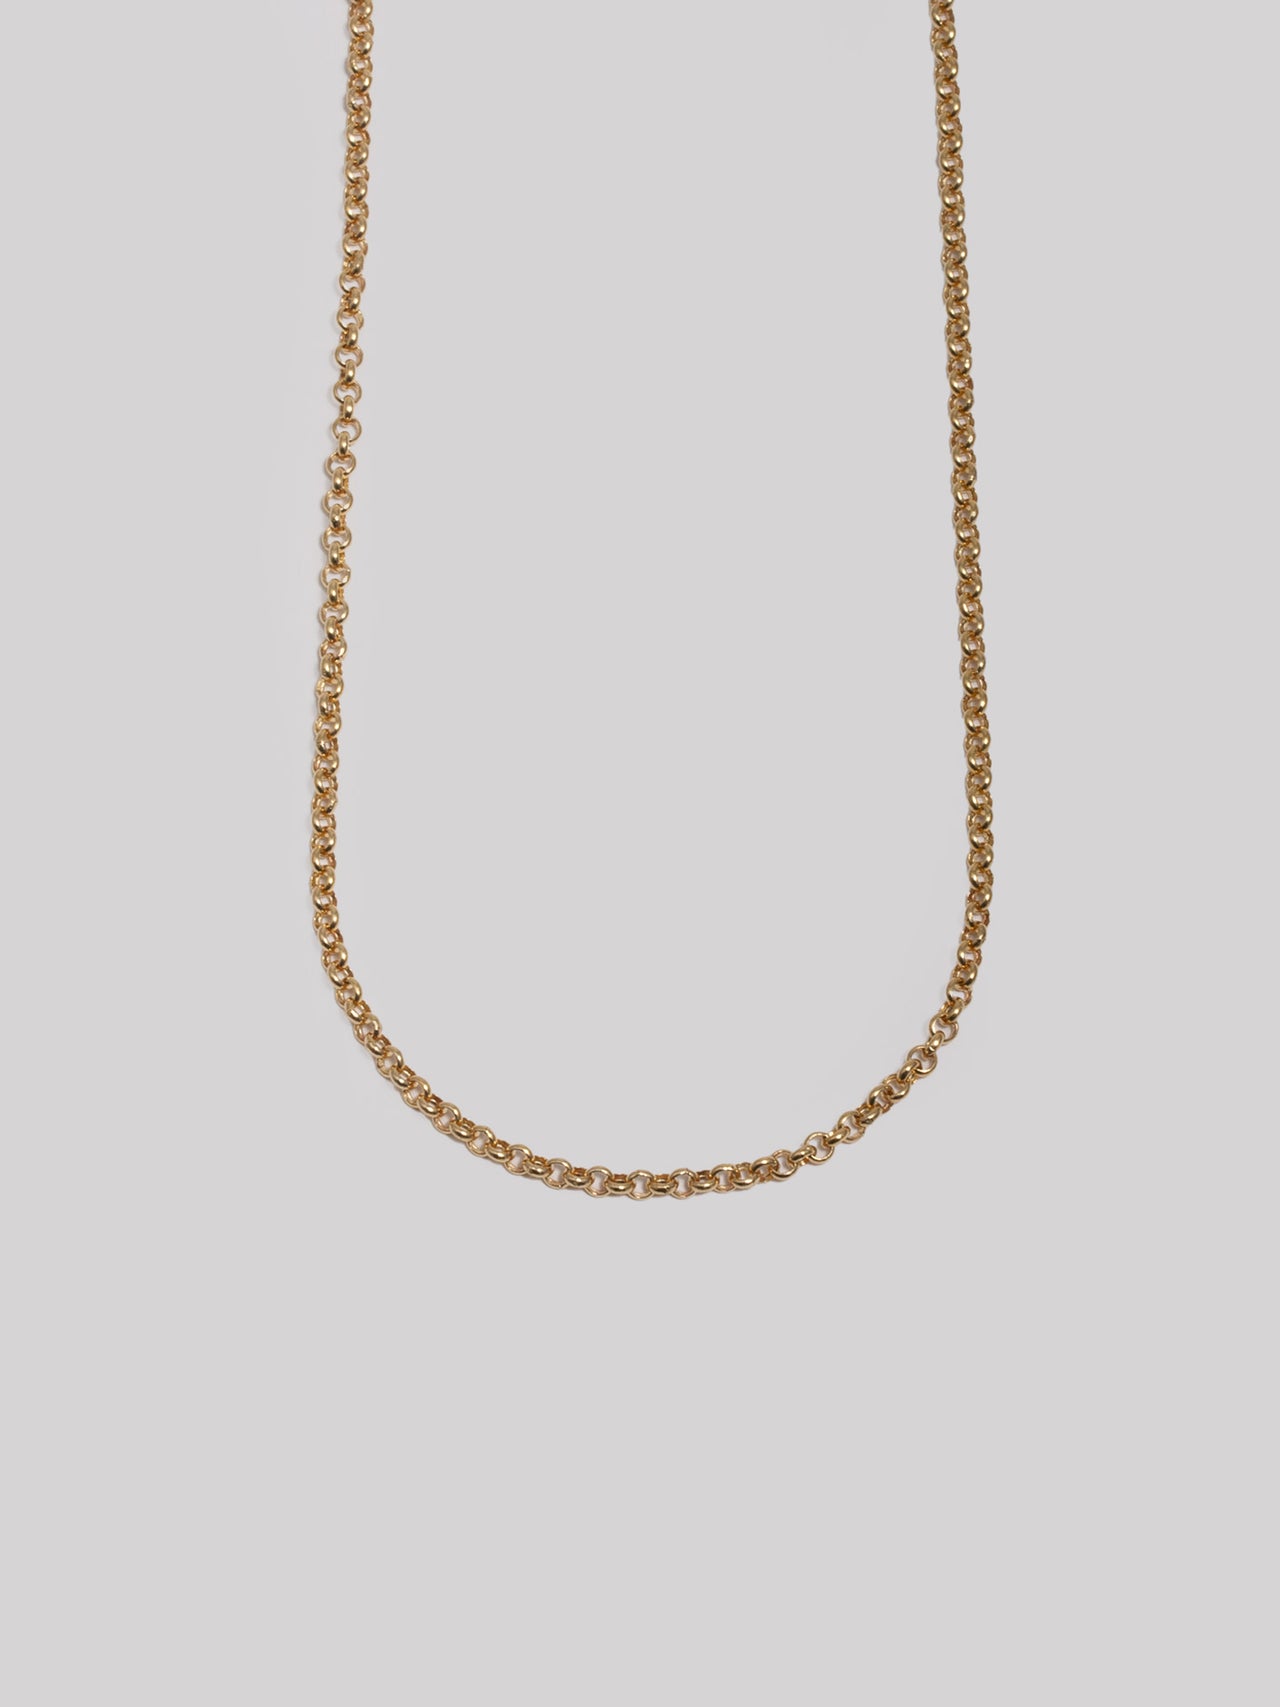 Half shot of 14kt Yellow Gold Hollow Rolo Chain Necklace. Light grey background. 